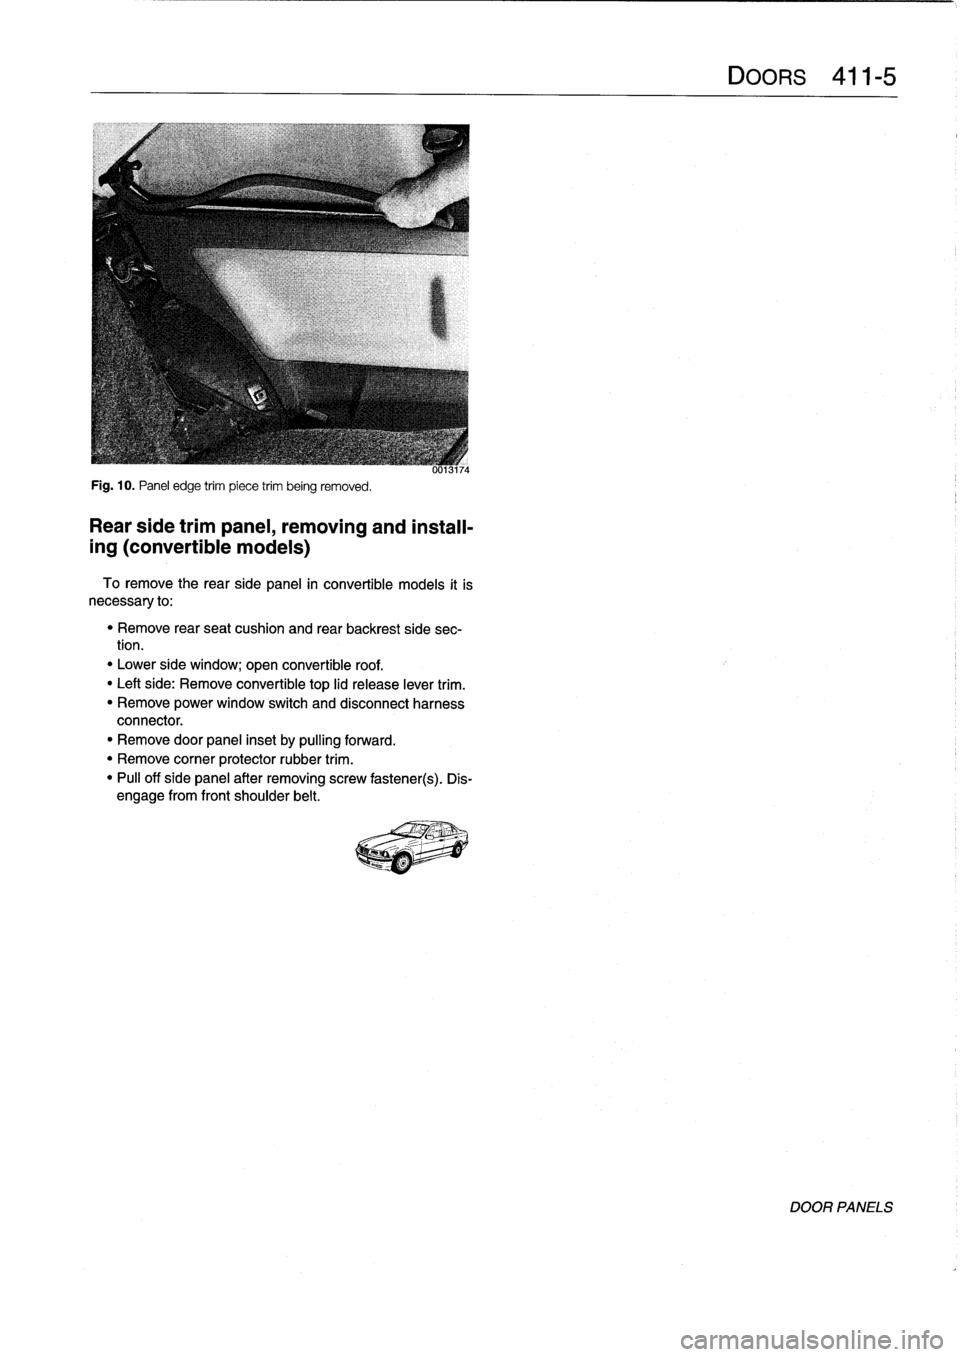 BMW 323i 1998 E36 Workshop Manual 
Fig
.
10
.
Panel
edge
trim
piece
trim
being
removed
.

Rear
side
trimpanel,
removing
and
install-

ing
(convertible
models)

To
remove
the
rearside
panel
in
convertible
models
it
is
necessary
to
:

"